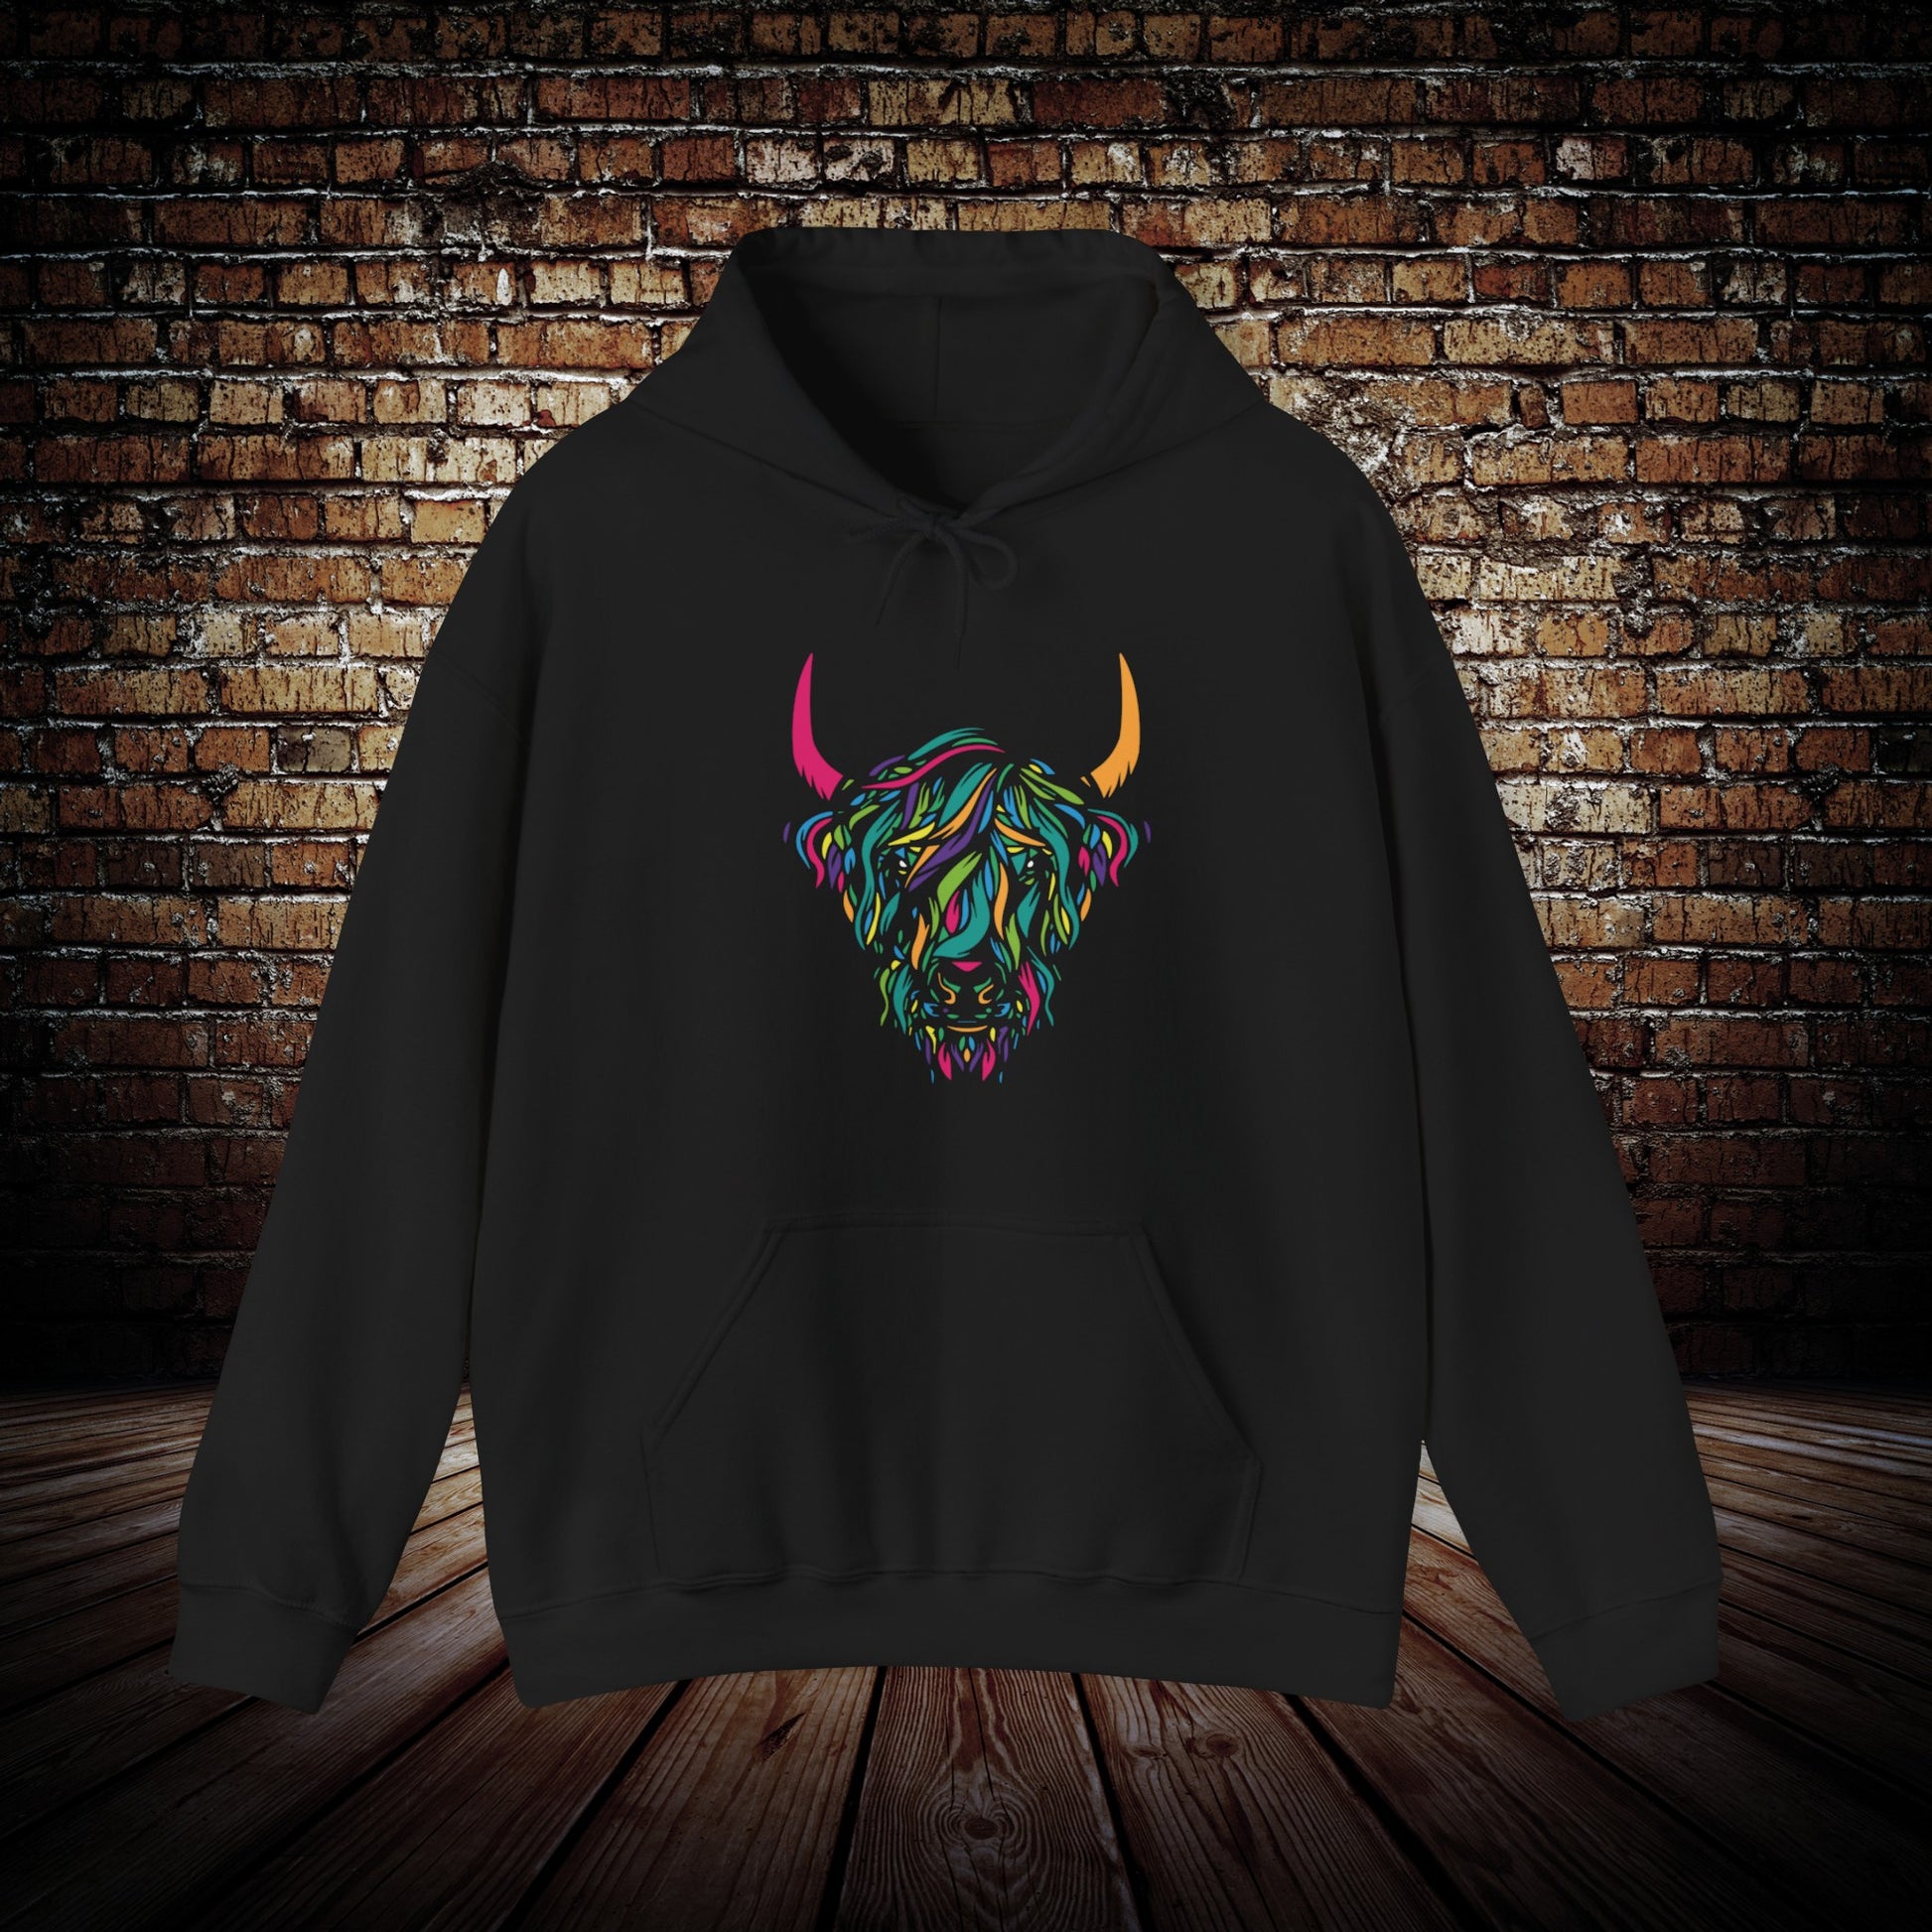 Abstract Bull Graphic hoodie